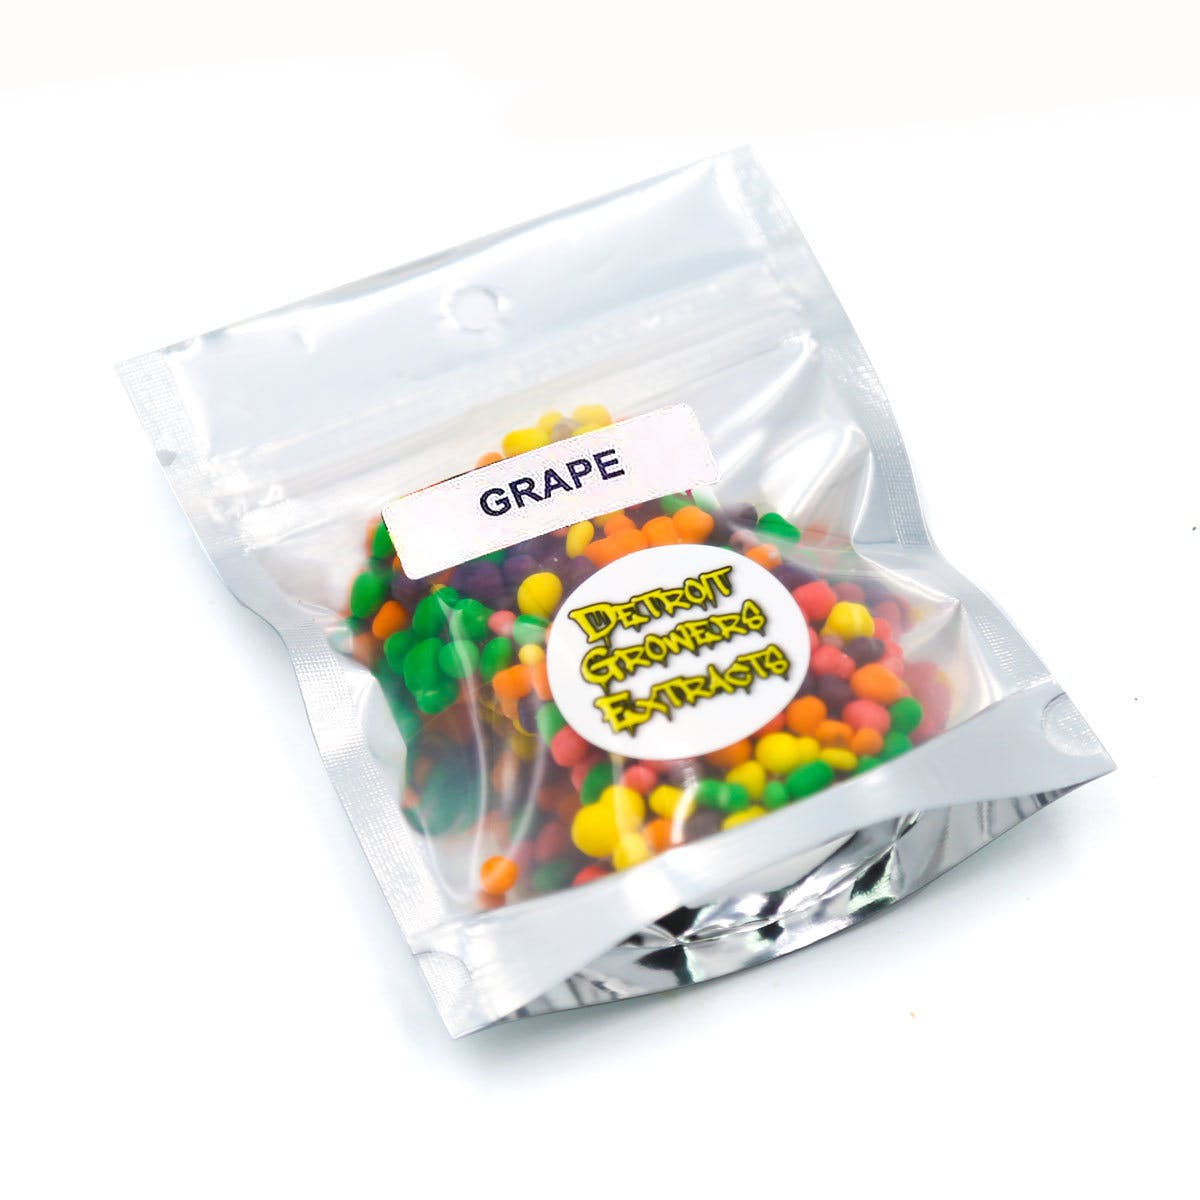 edible-detroit-growers-extracts-grape-nerds-rope-100mg